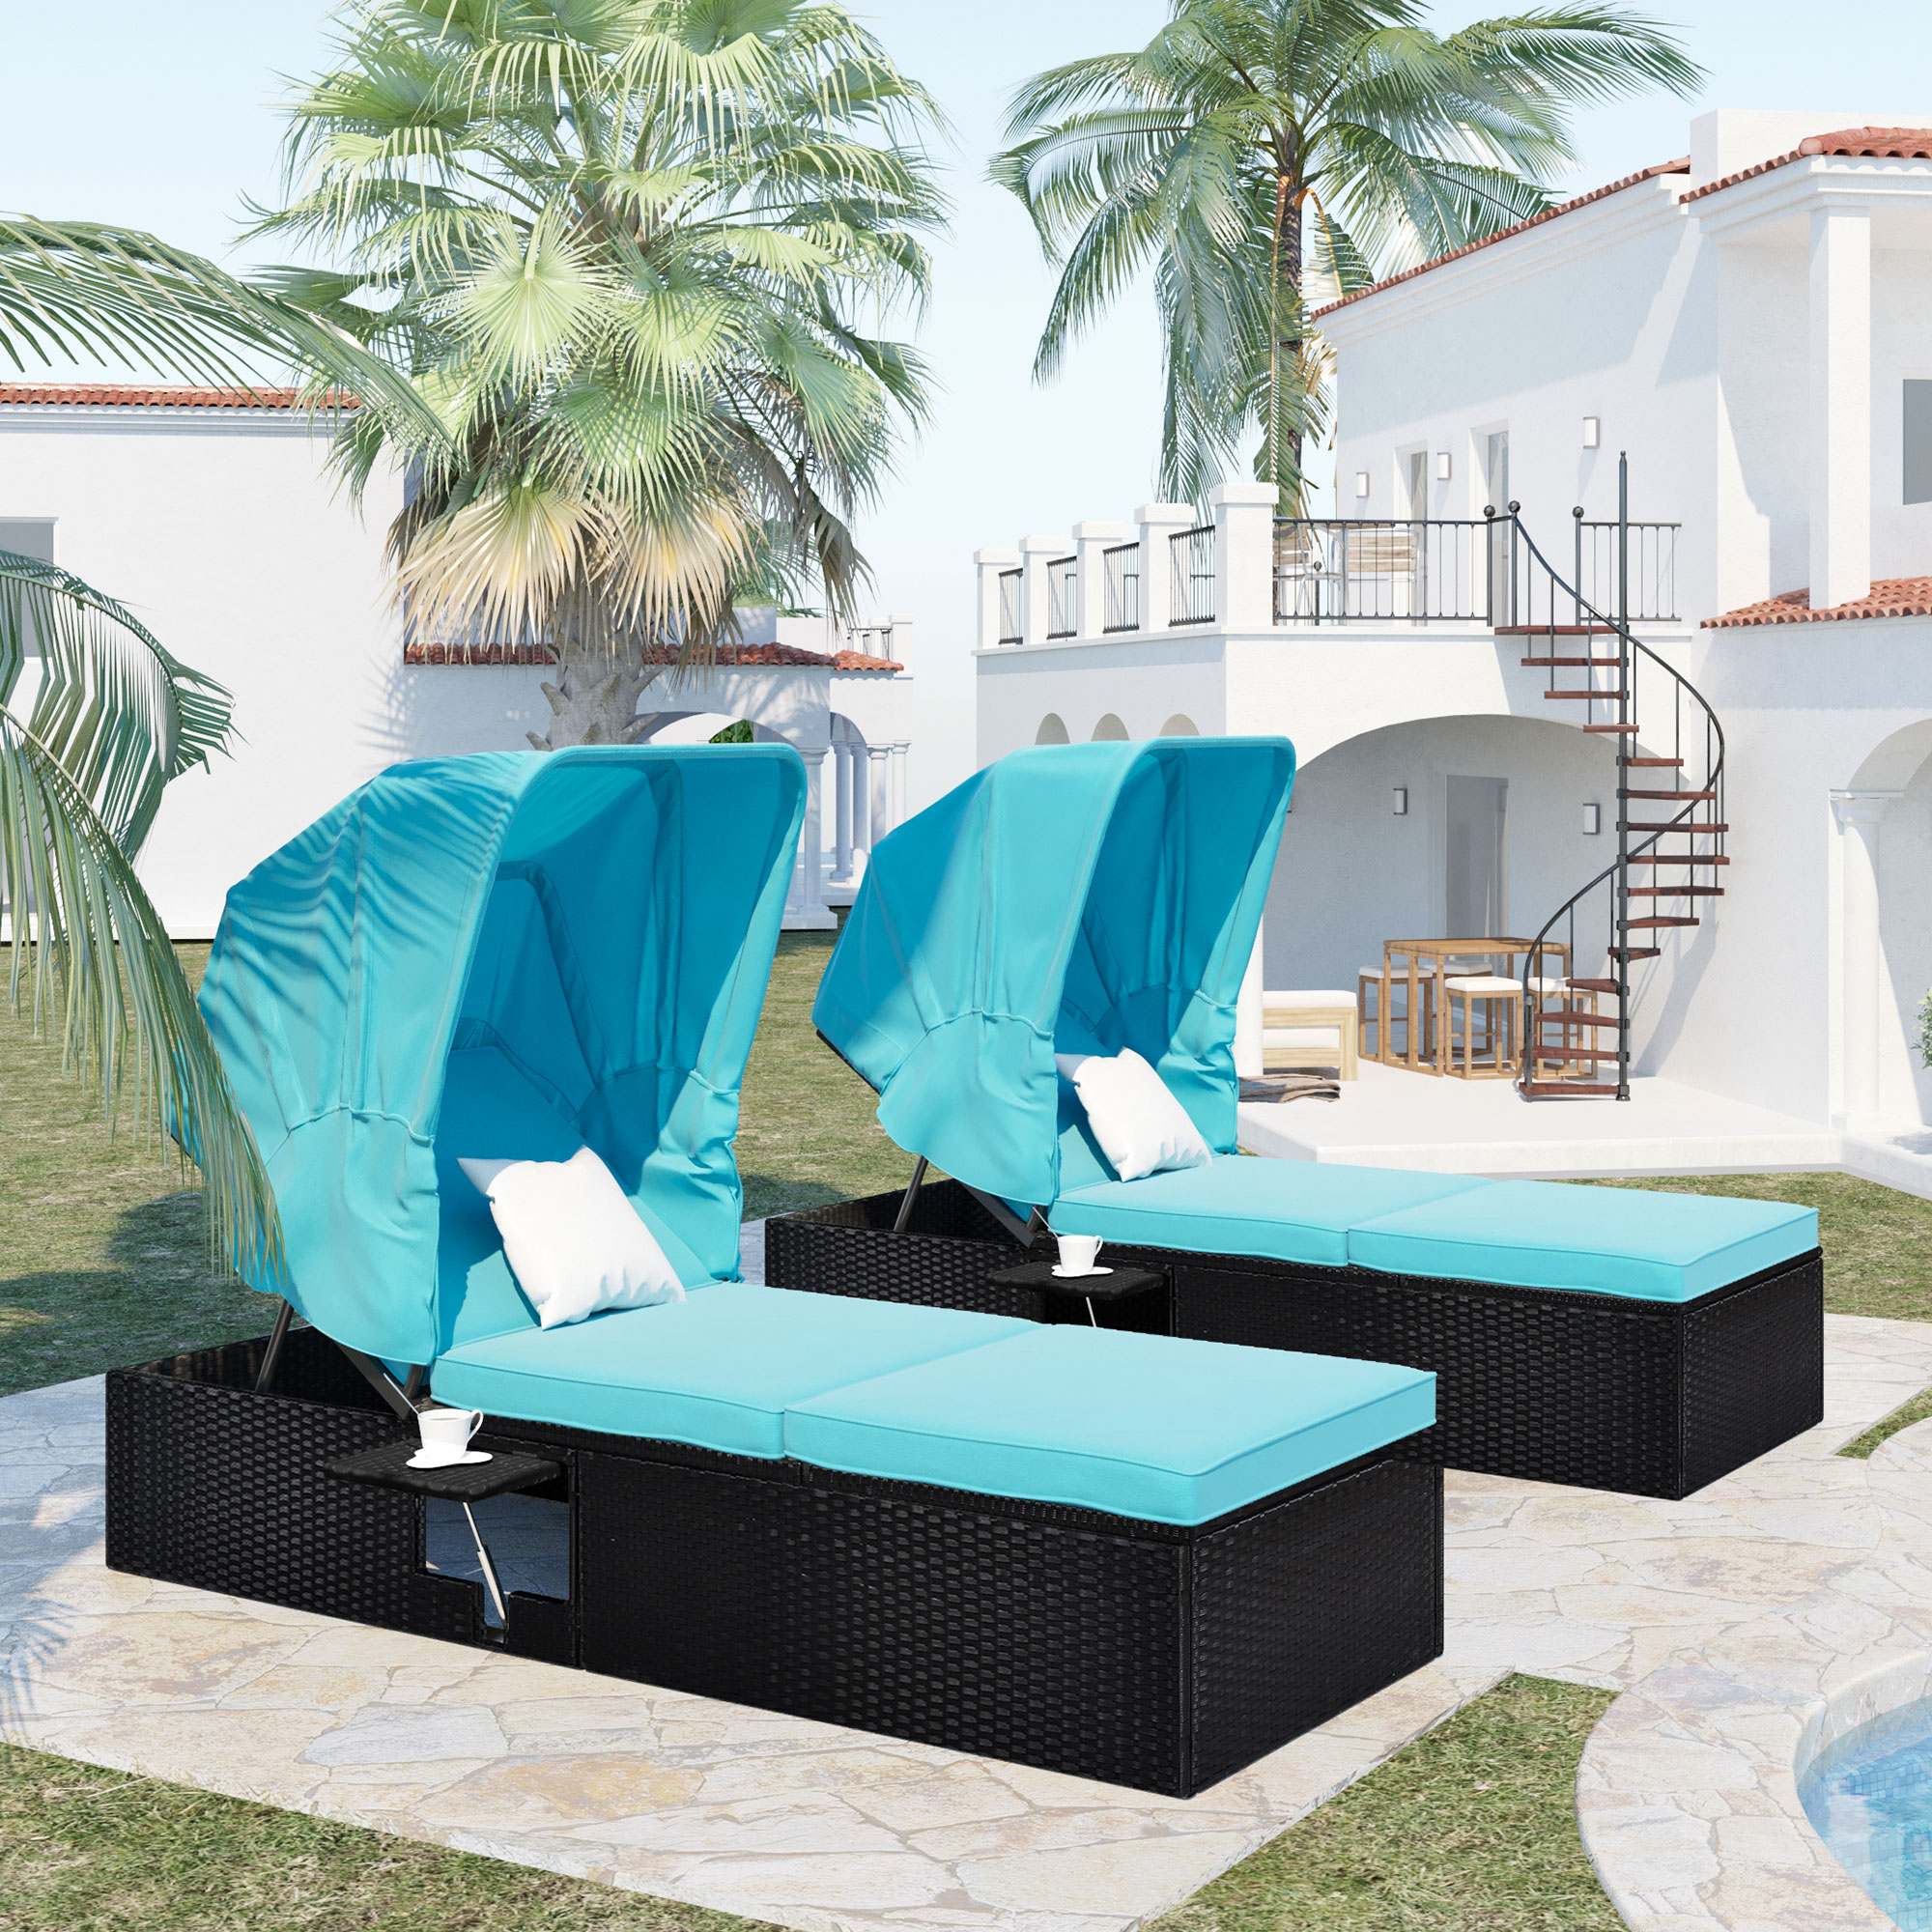 Seizeen 76.8" Outdoor Chaise Lounge, 2 Set Patio Chaise Lounge with Cushions, Canopy and Cup Table, Adjustable Lounge Chairs for Outside Garden Pool, Blue - image 1 of 9